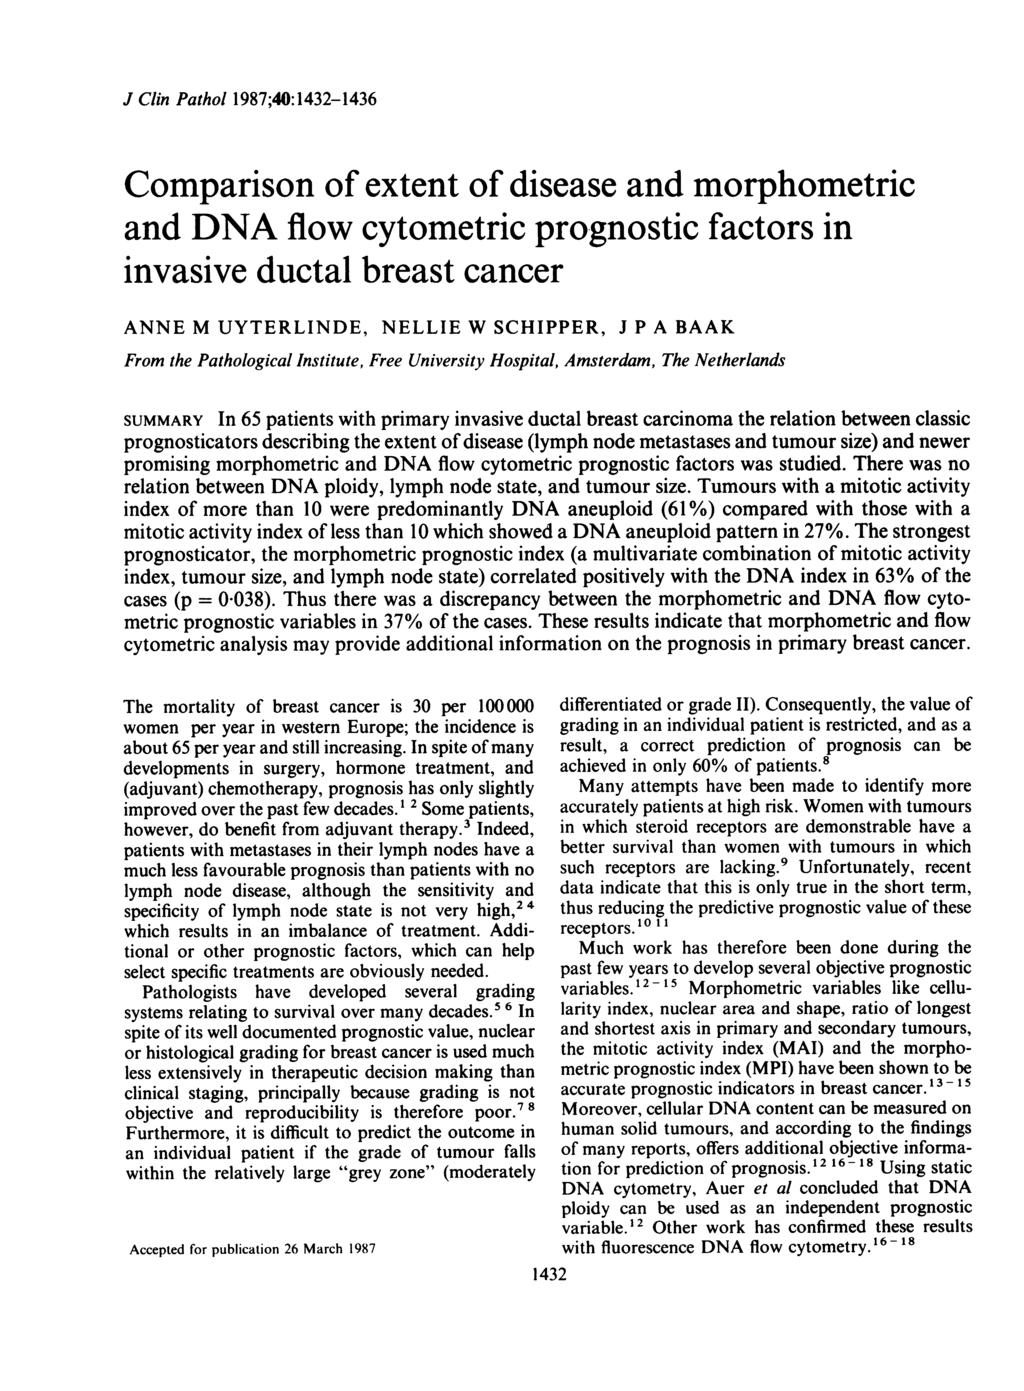 J Clin Pathol 1987;40:1432-1436 Comparison of extent of disease and morphometric and DNA flow cytometric prognostic factors in invasive ductal breast cancer ANNE M UYTERLINDE, NELLIE W SCHIPPER, J P